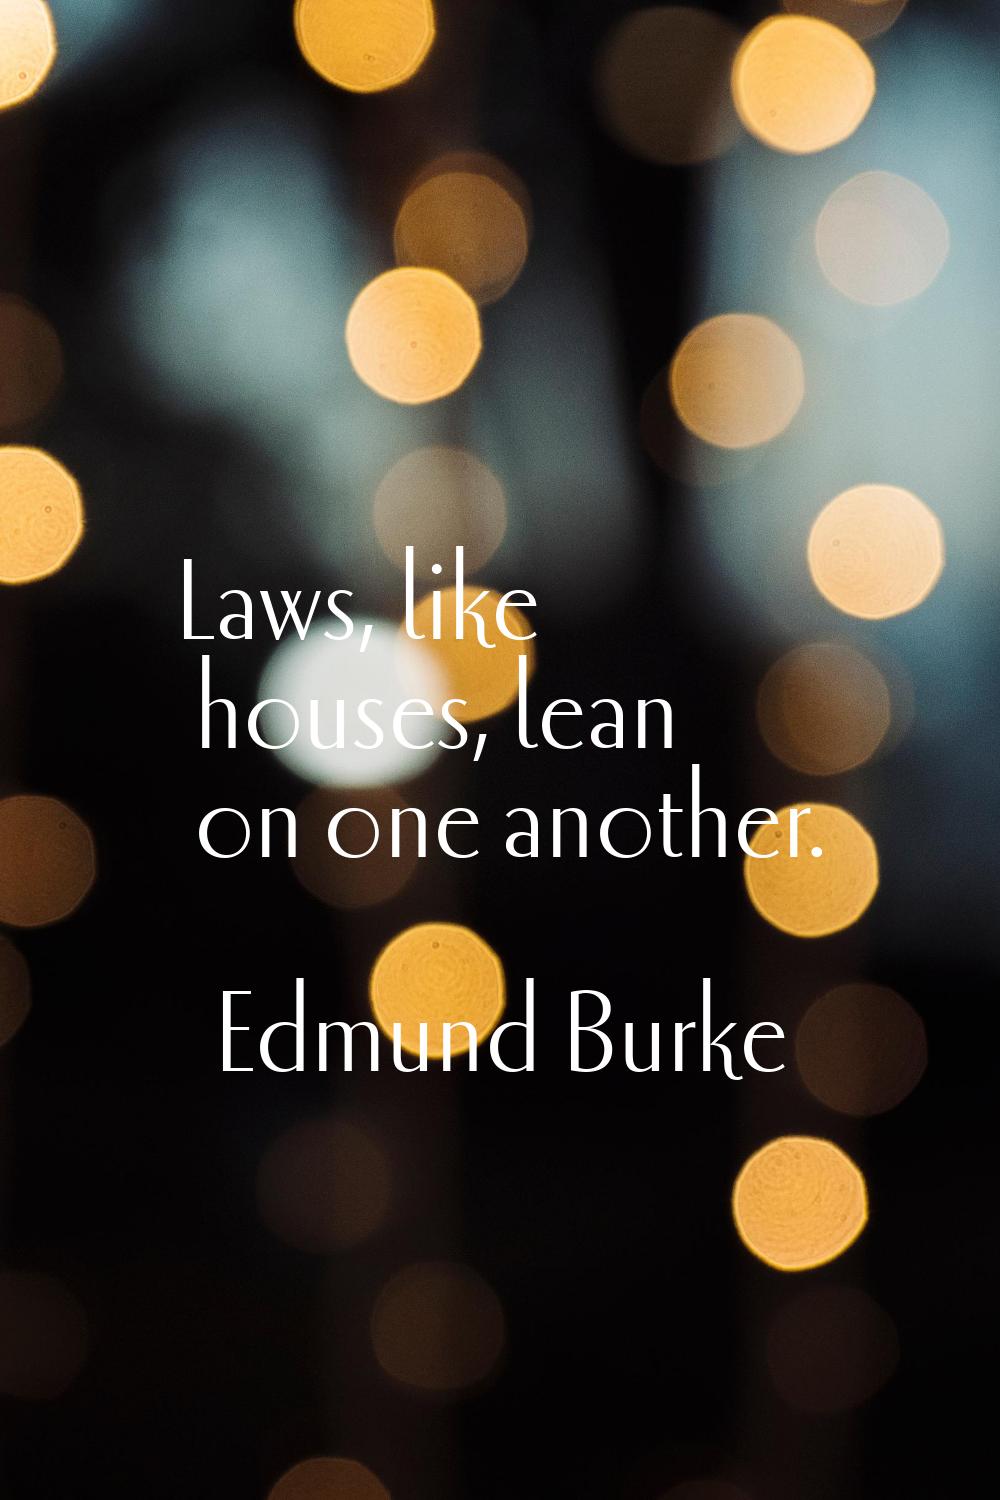 Laws, like houses, lean on one another.